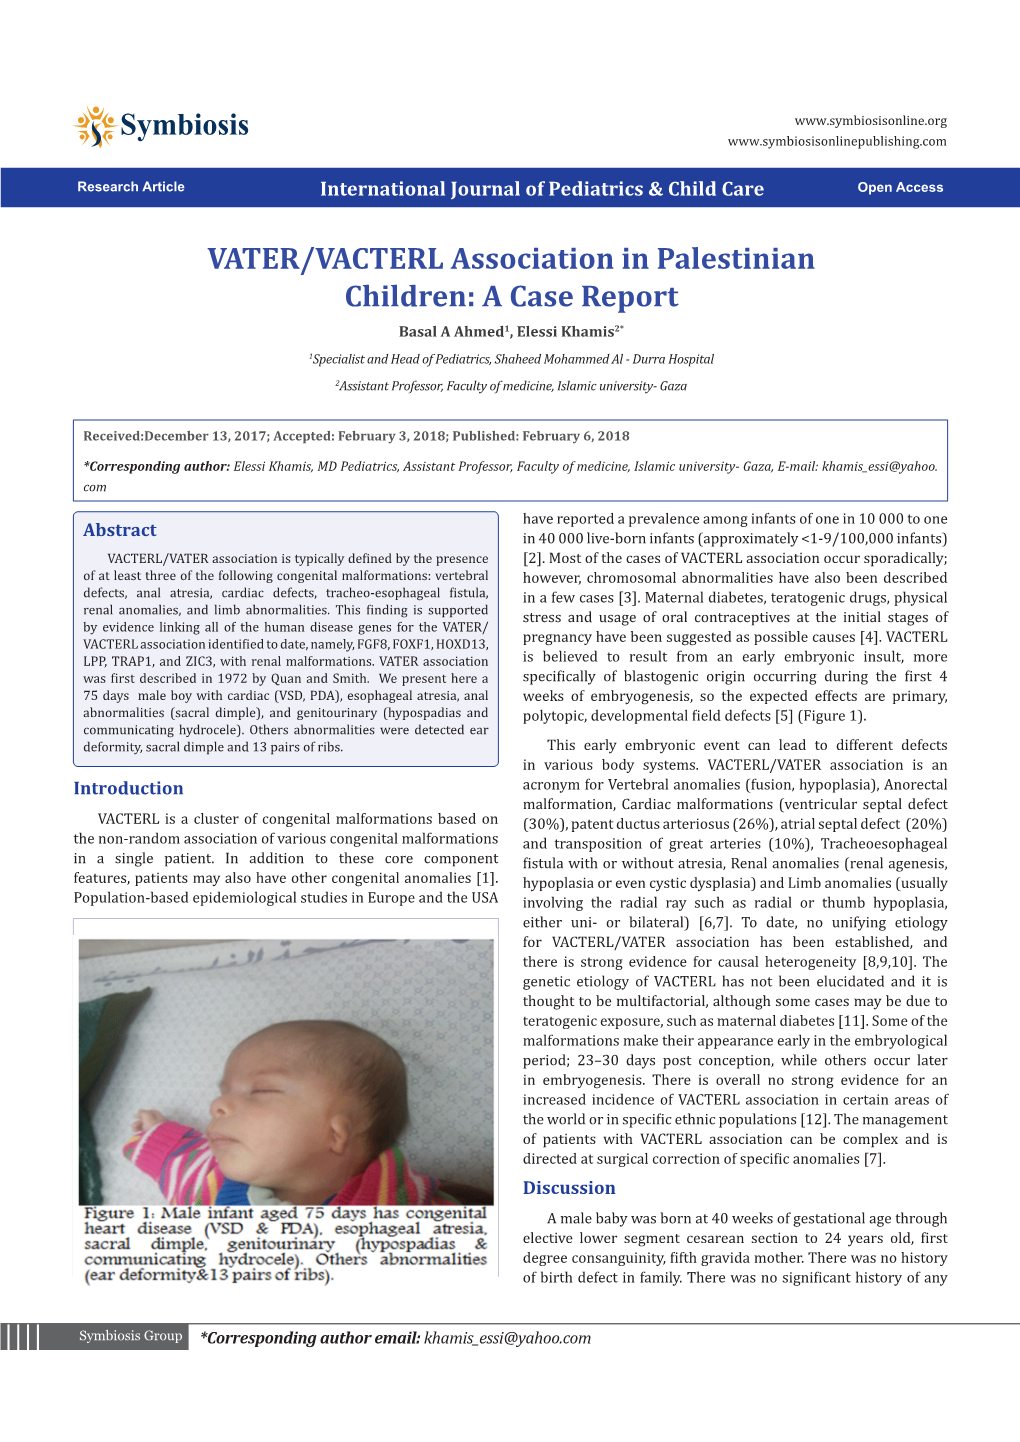 VATER/VACTERL Association in Palestinian Children: a Case Report